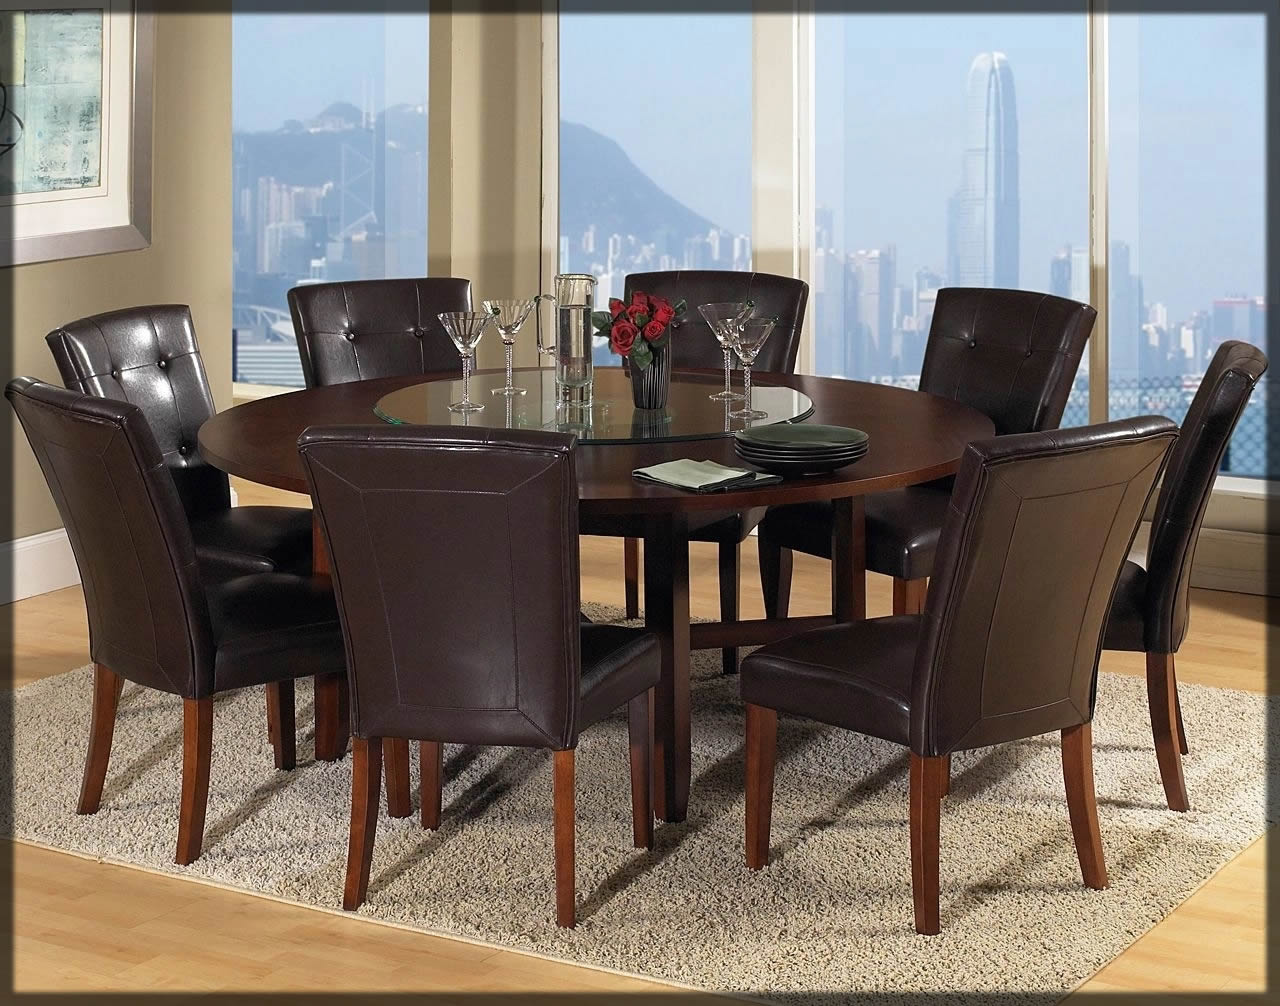 wooden round dining table